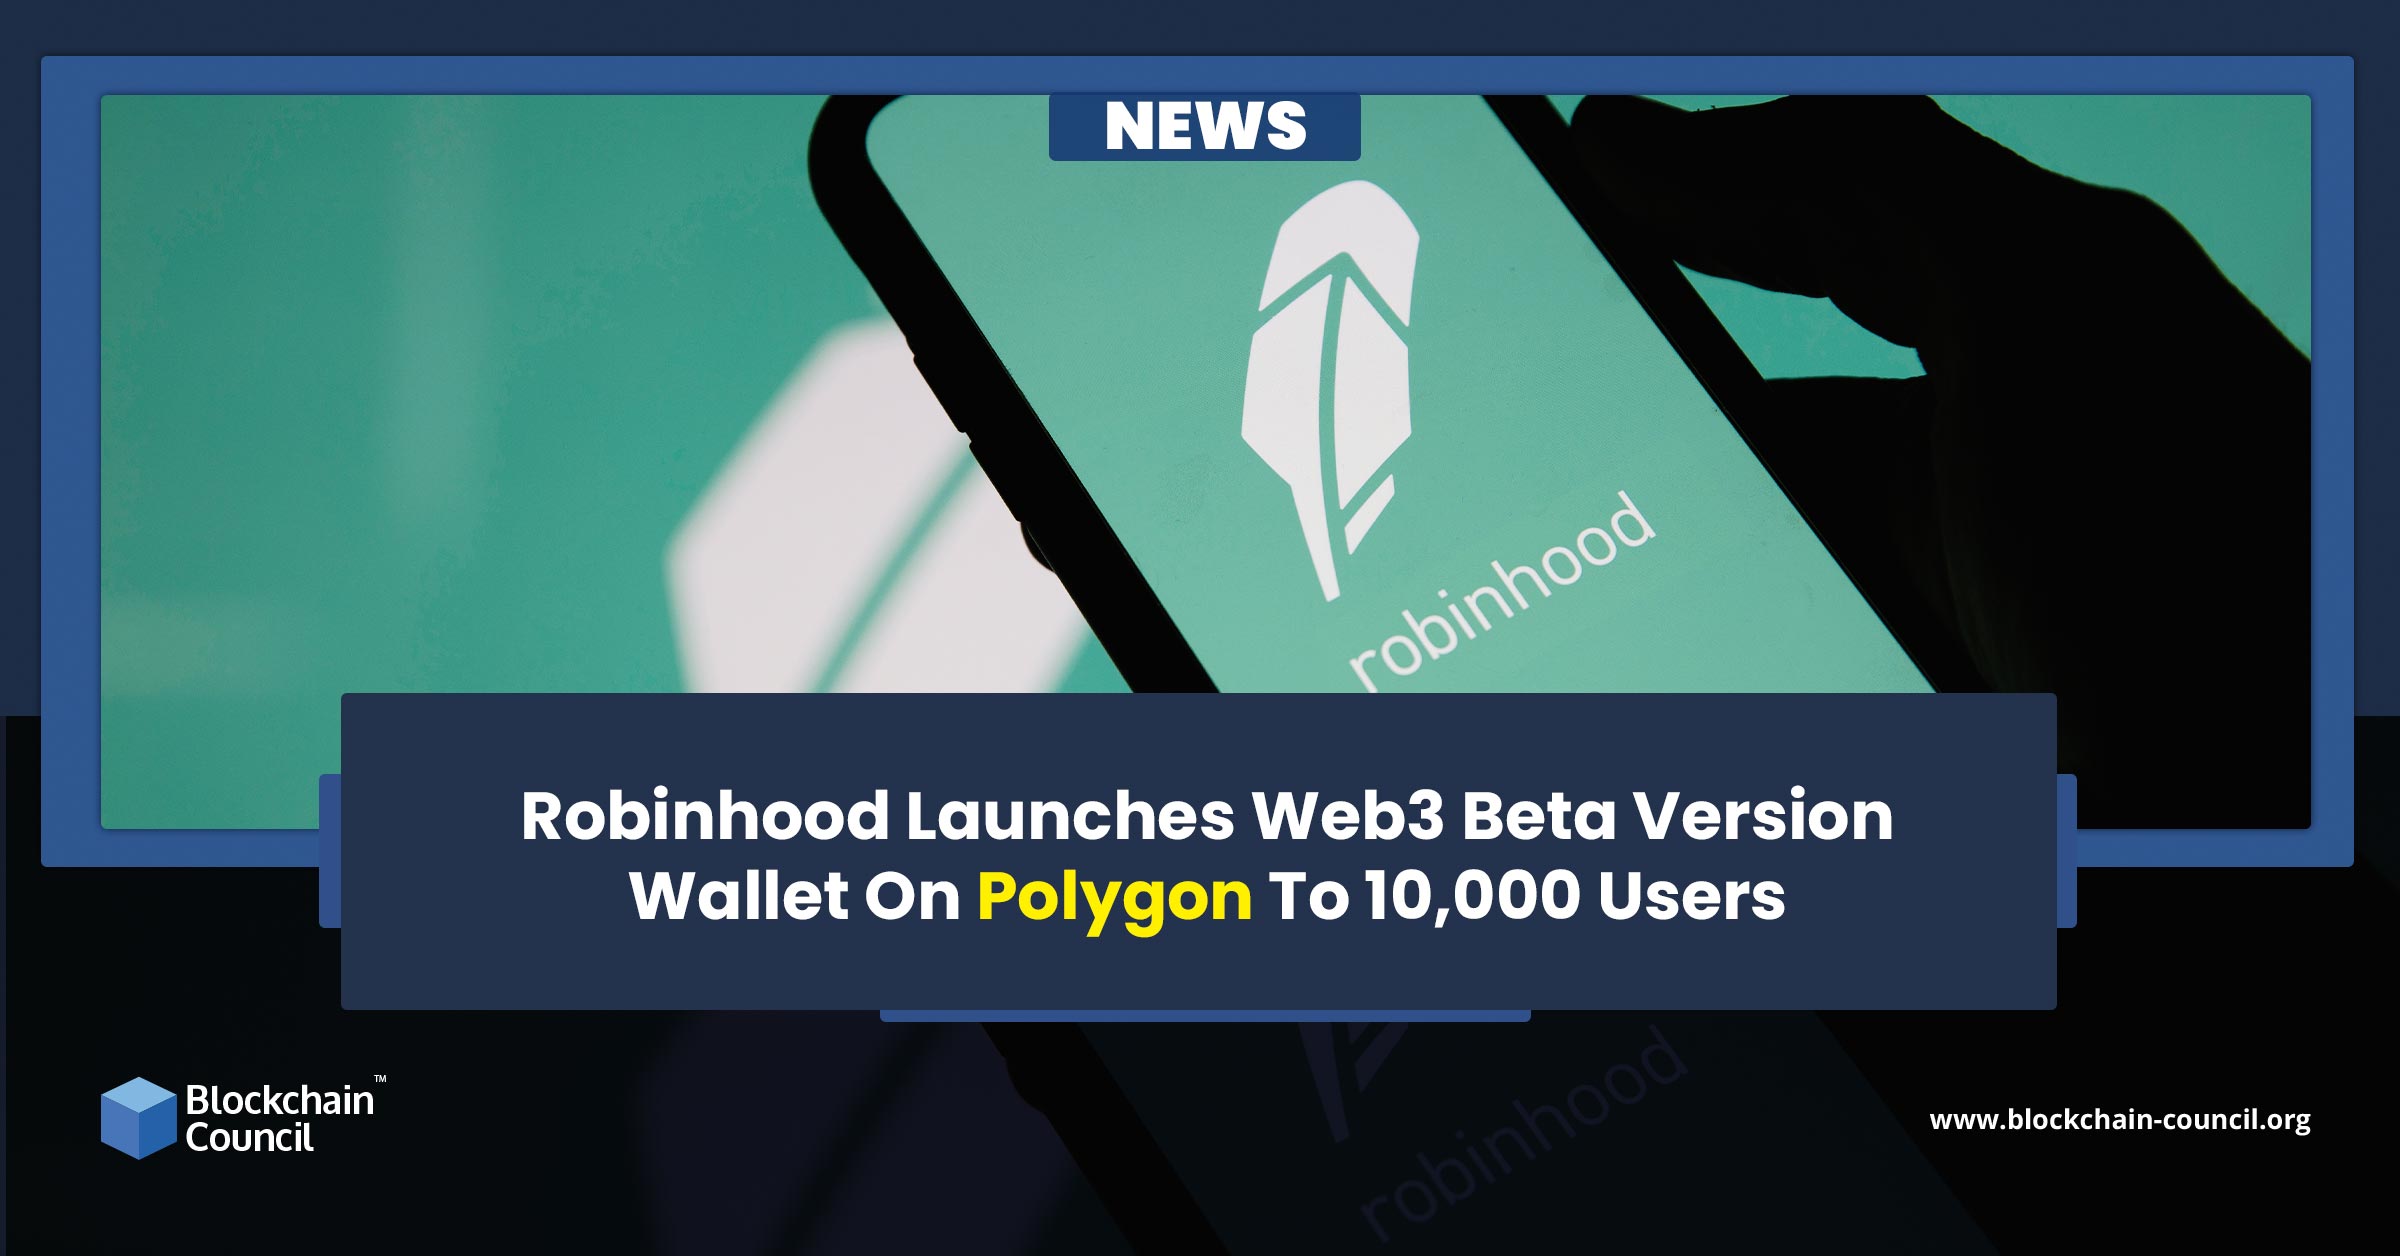 Robinhood Launches Web3 Beta Version Wallet On Polygon To 10,000 Users